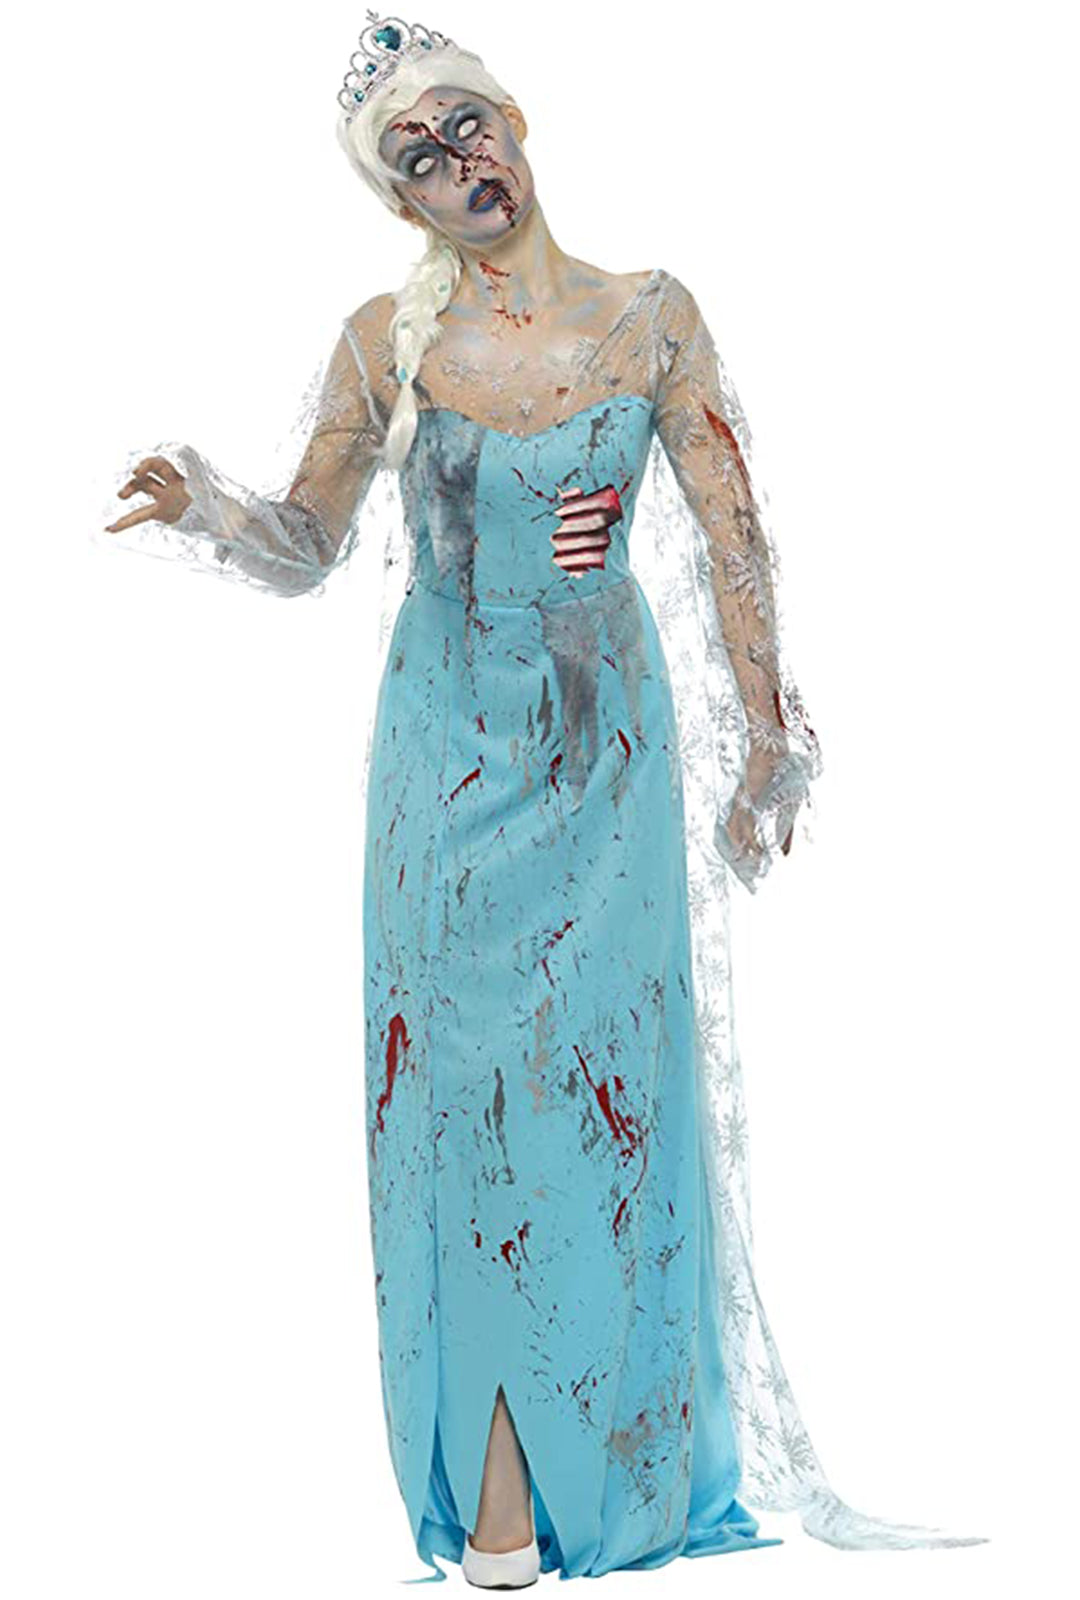 Zombie Froze To Death Costume